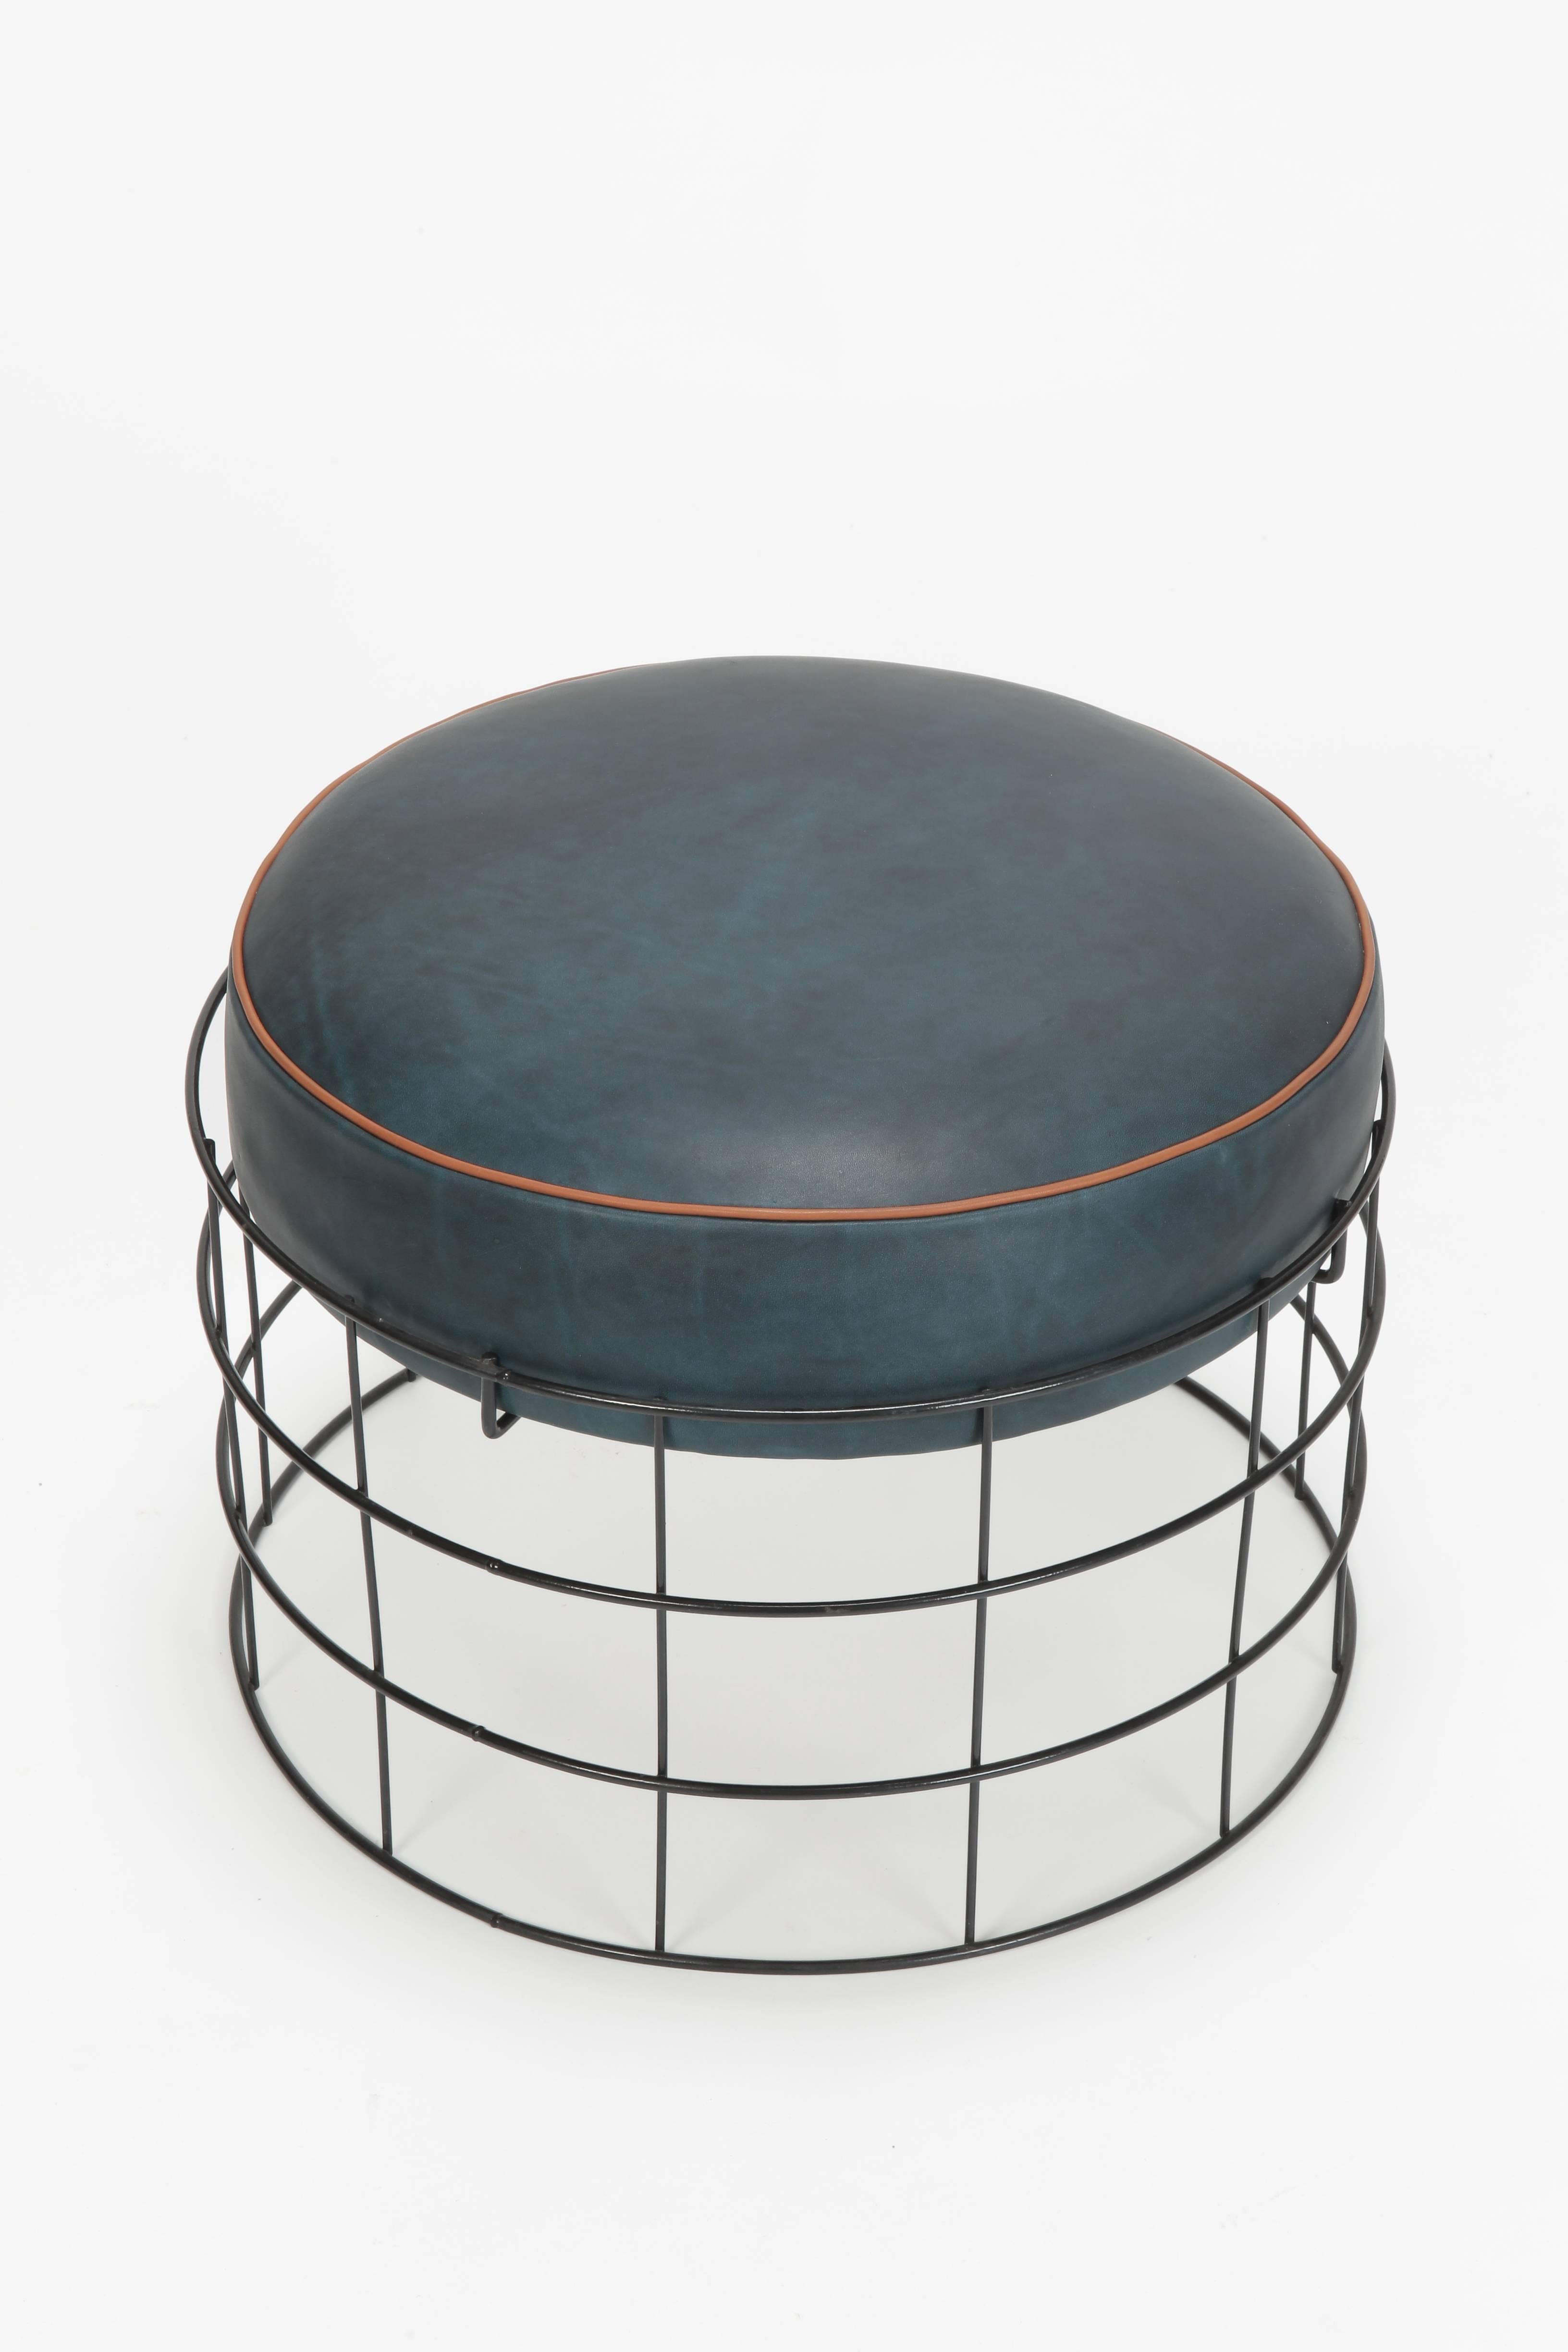 Very finely made wireframe stool from the revolutionary wire frame collection 1959-1961 by Verner Panton. The suede cover was replaced.